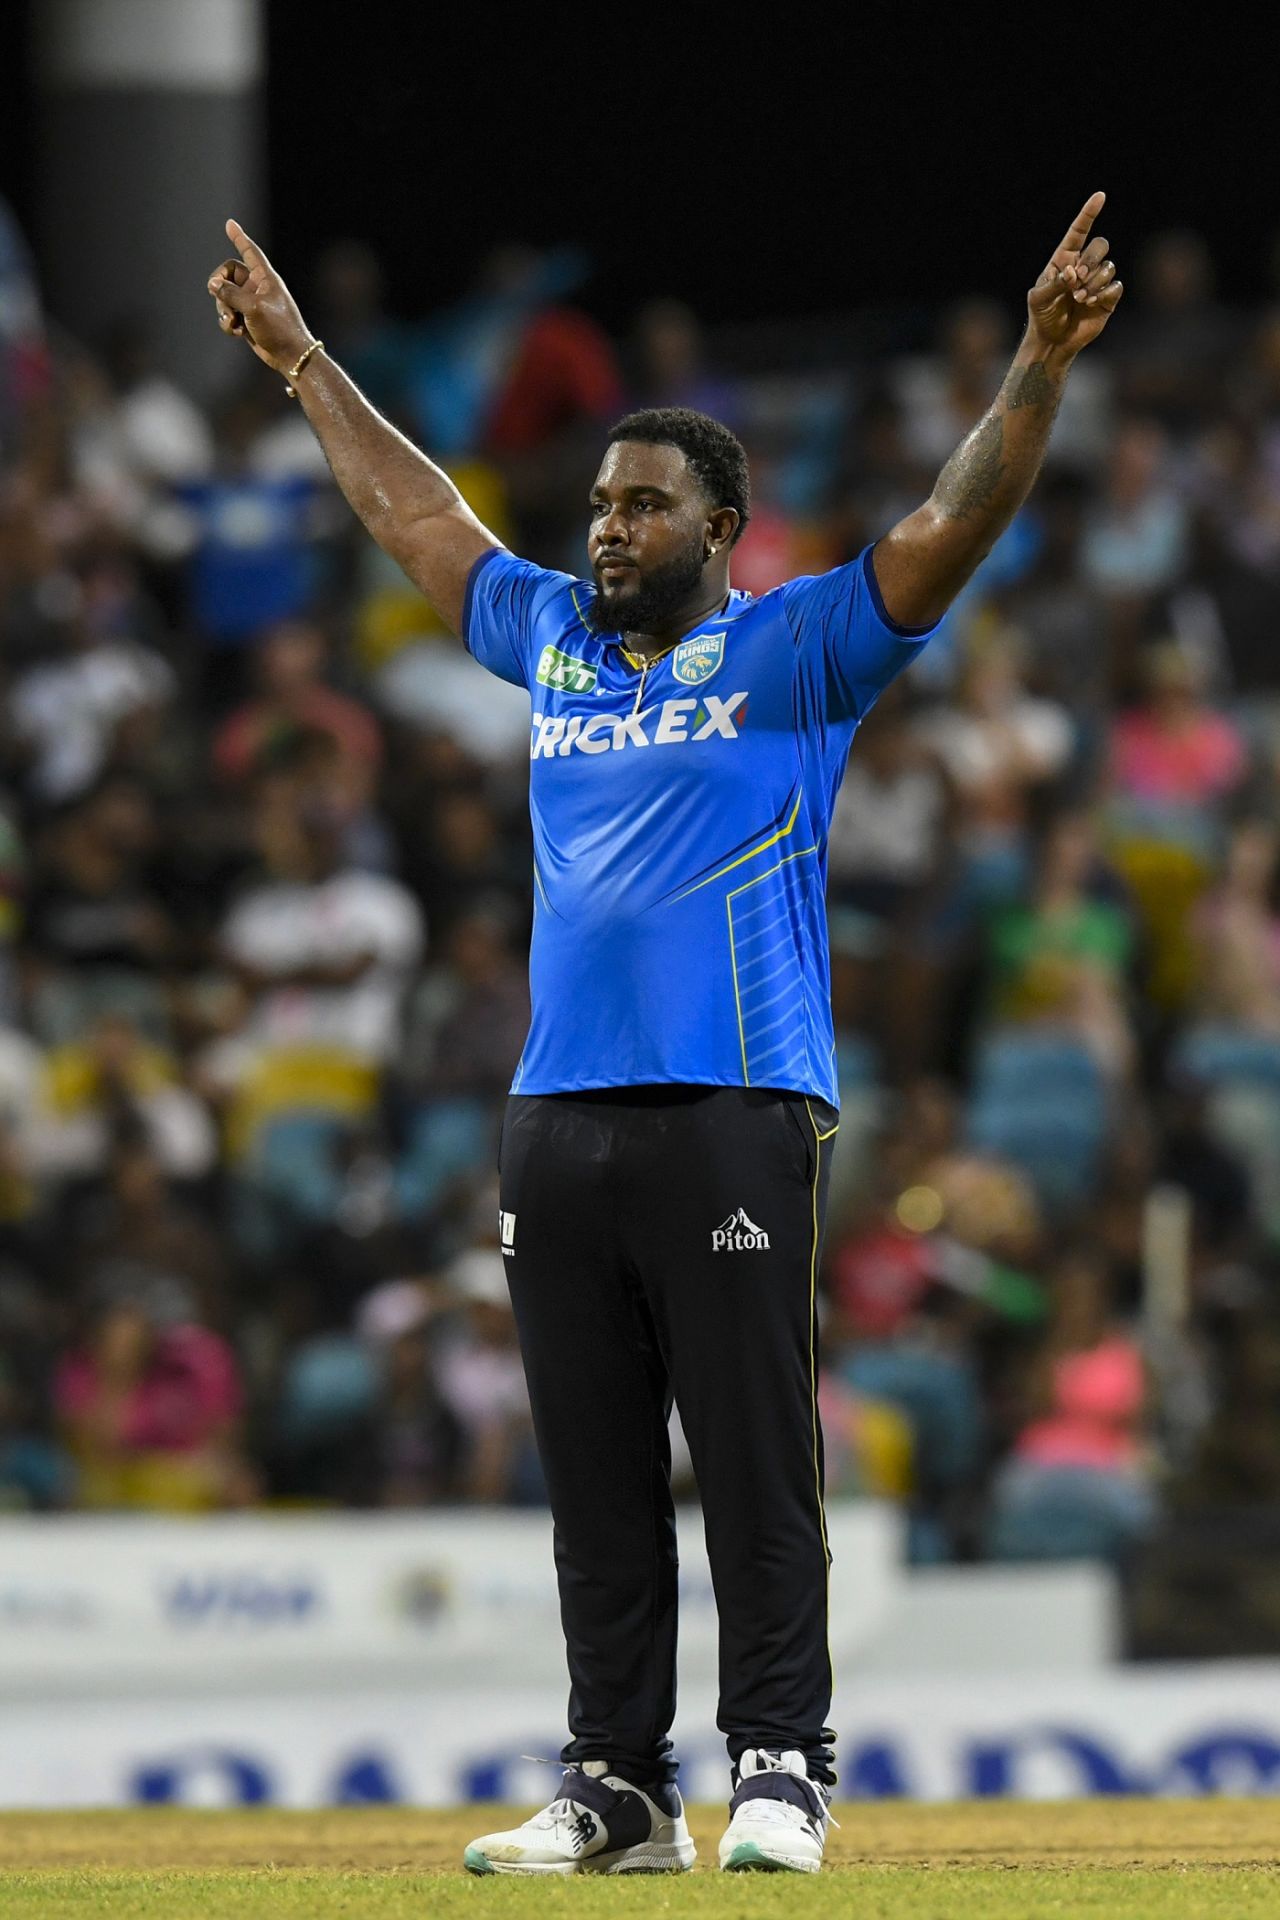 Roshon Primus picked two wickets in an over to push Barbados Royals further back, Barbados Royals vs St Lucia Kings, CPL 2023, Bridgetown, September 2, 2023